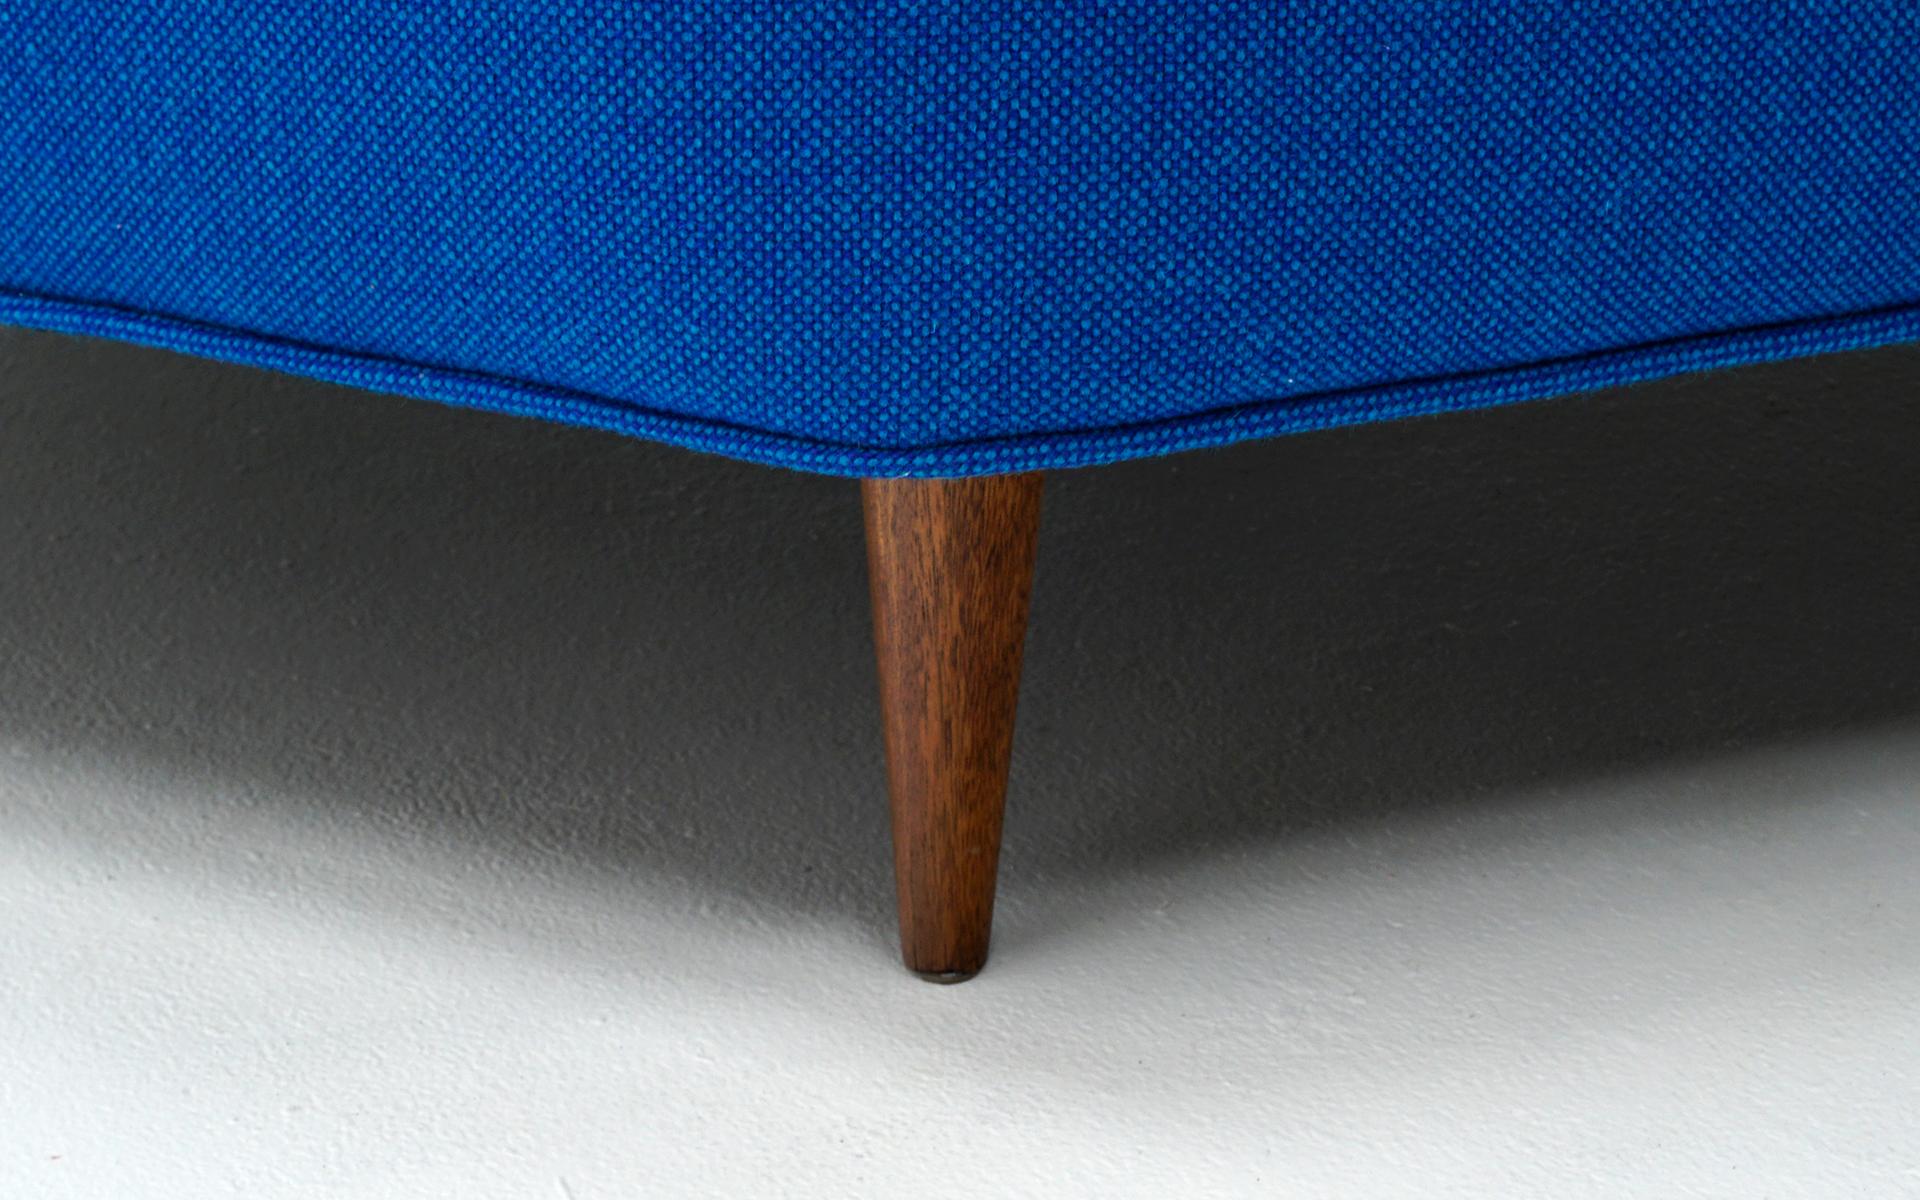 Upholstery Octagonal Sofa Attributed to Harvey Probber, Restored in Blue Maharam Fabric For Sale